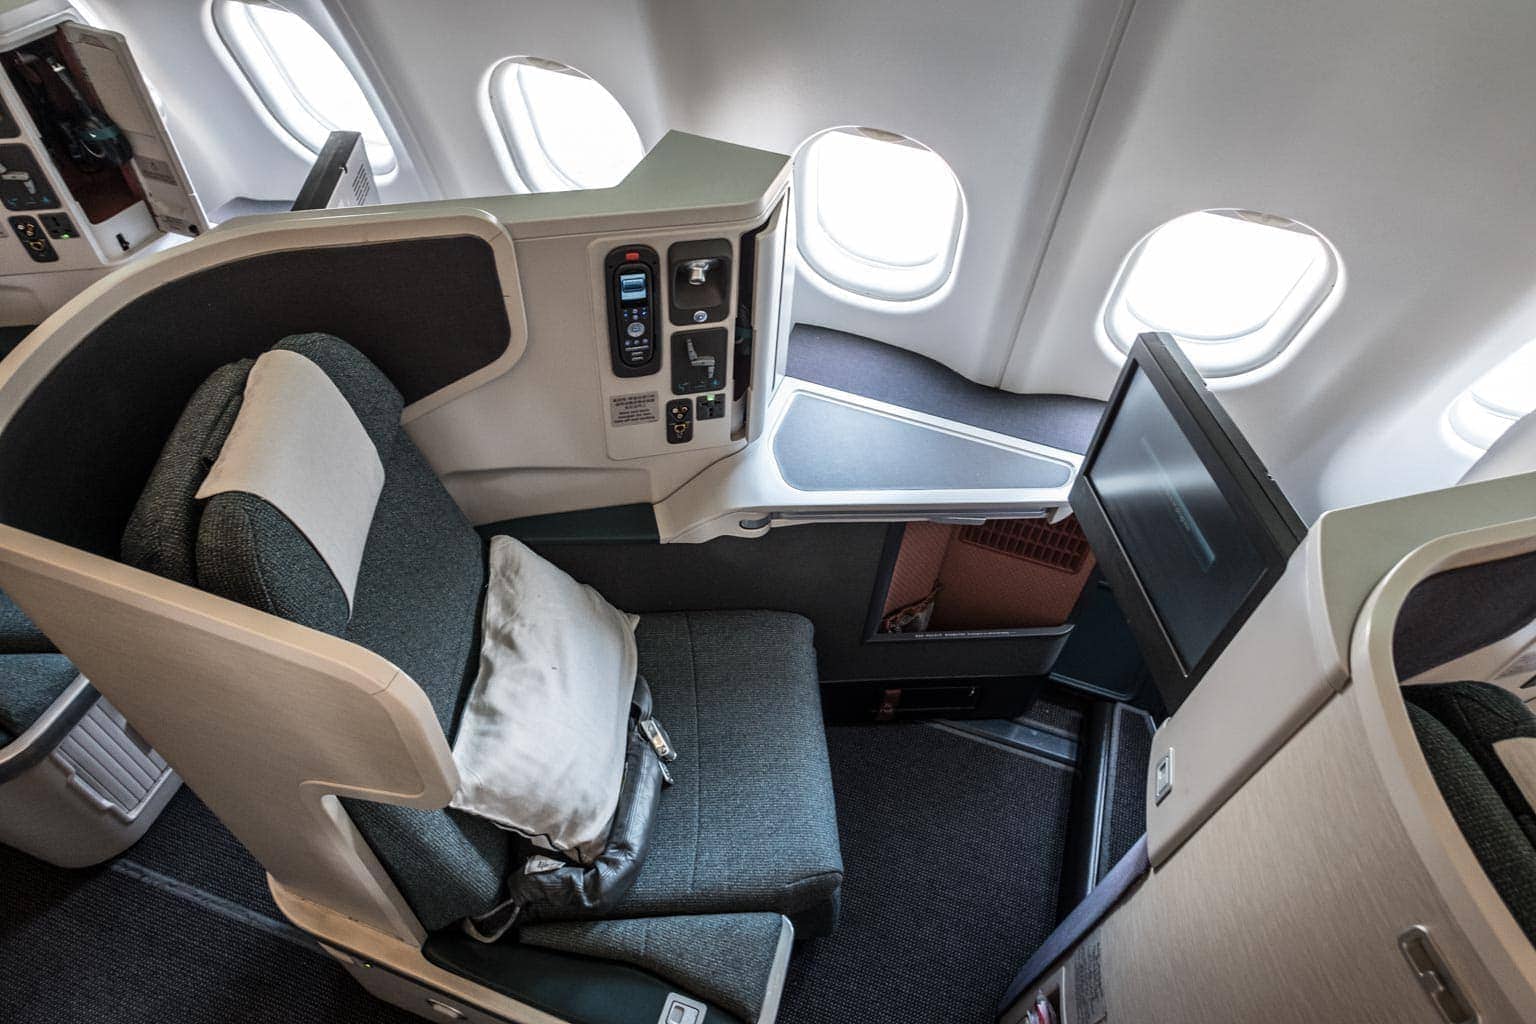 Cathay Pacific A330 Business Class